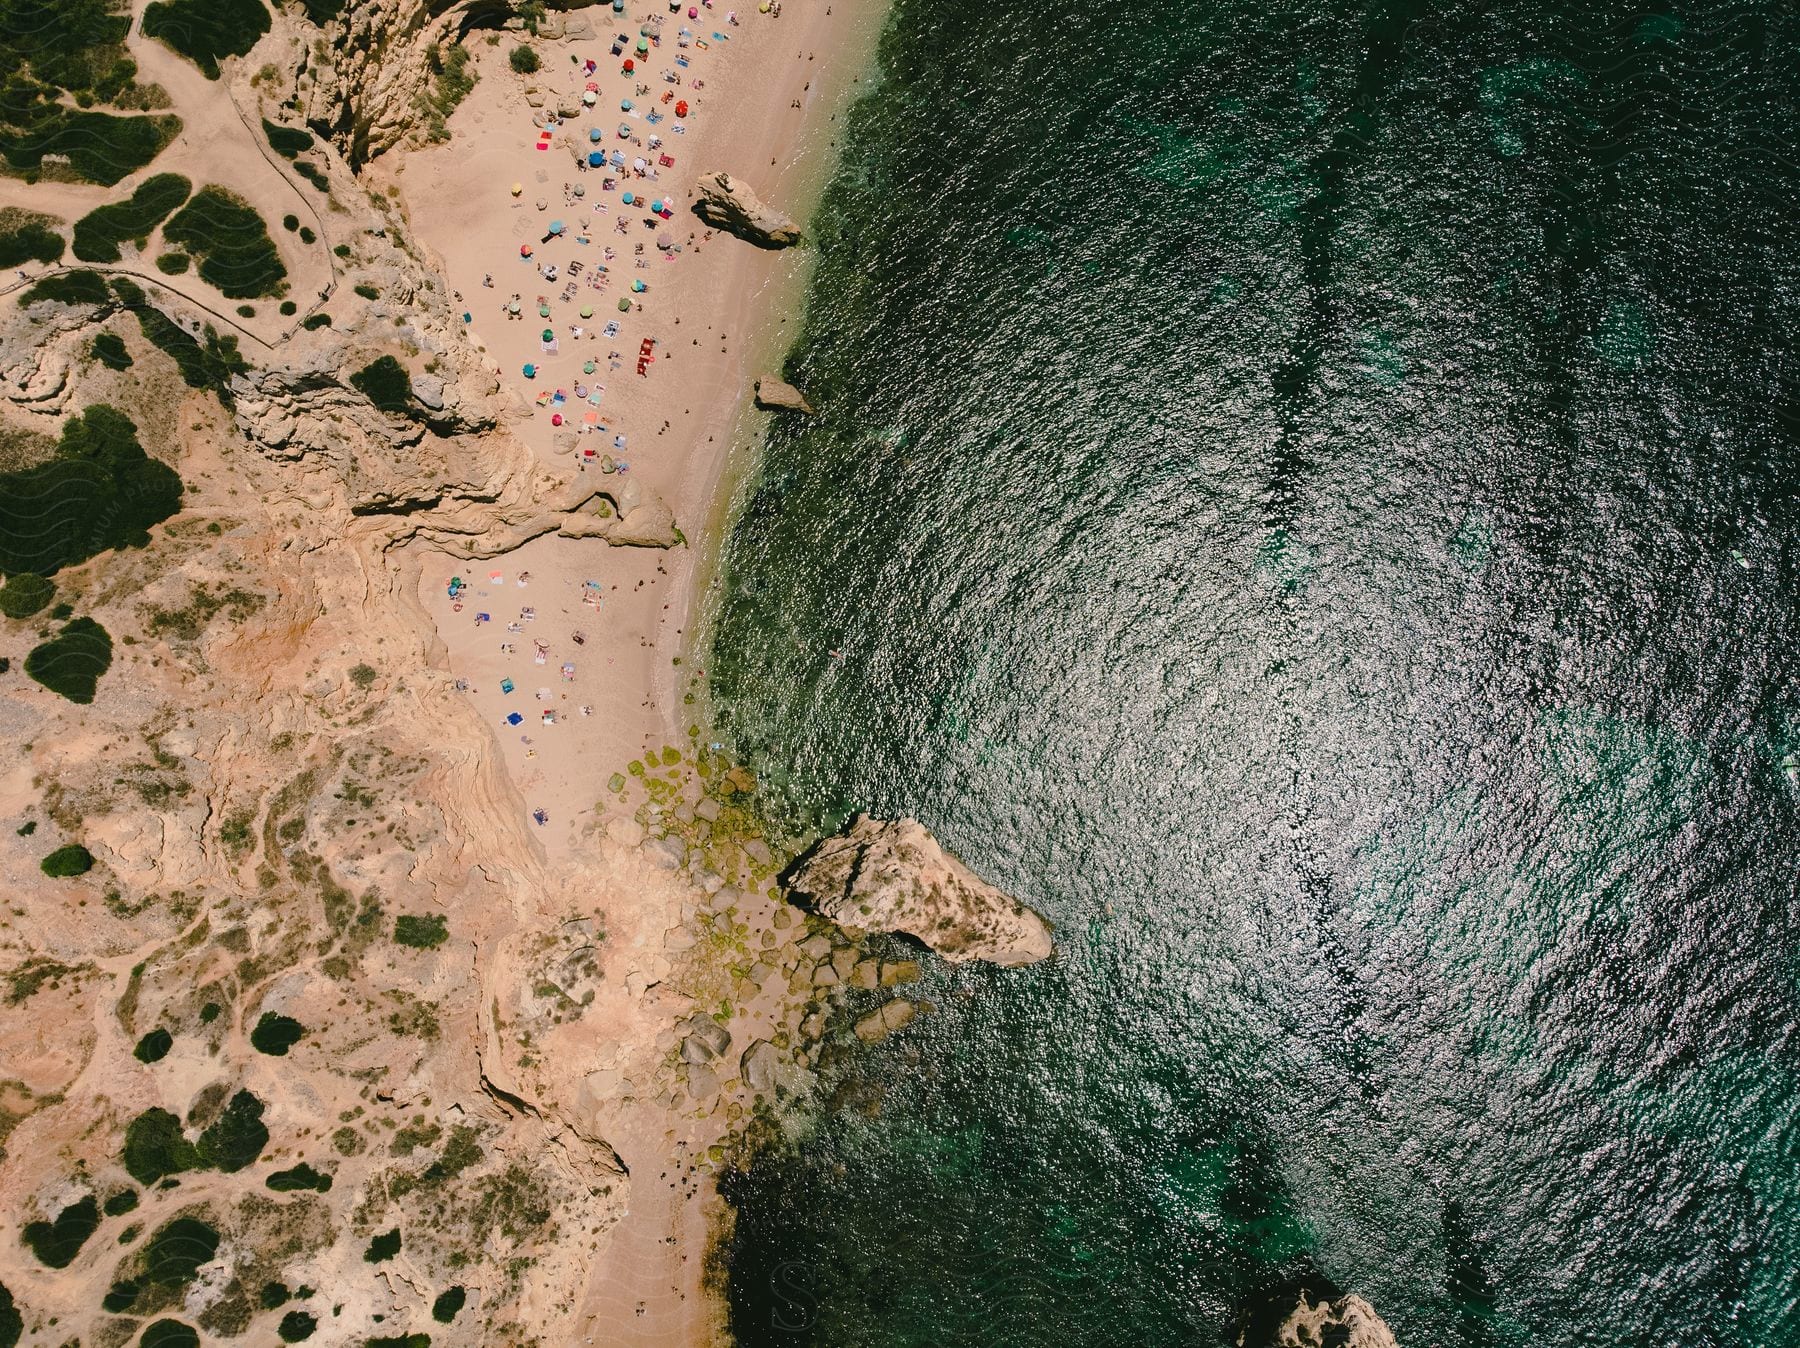 A crowded beach seen from above